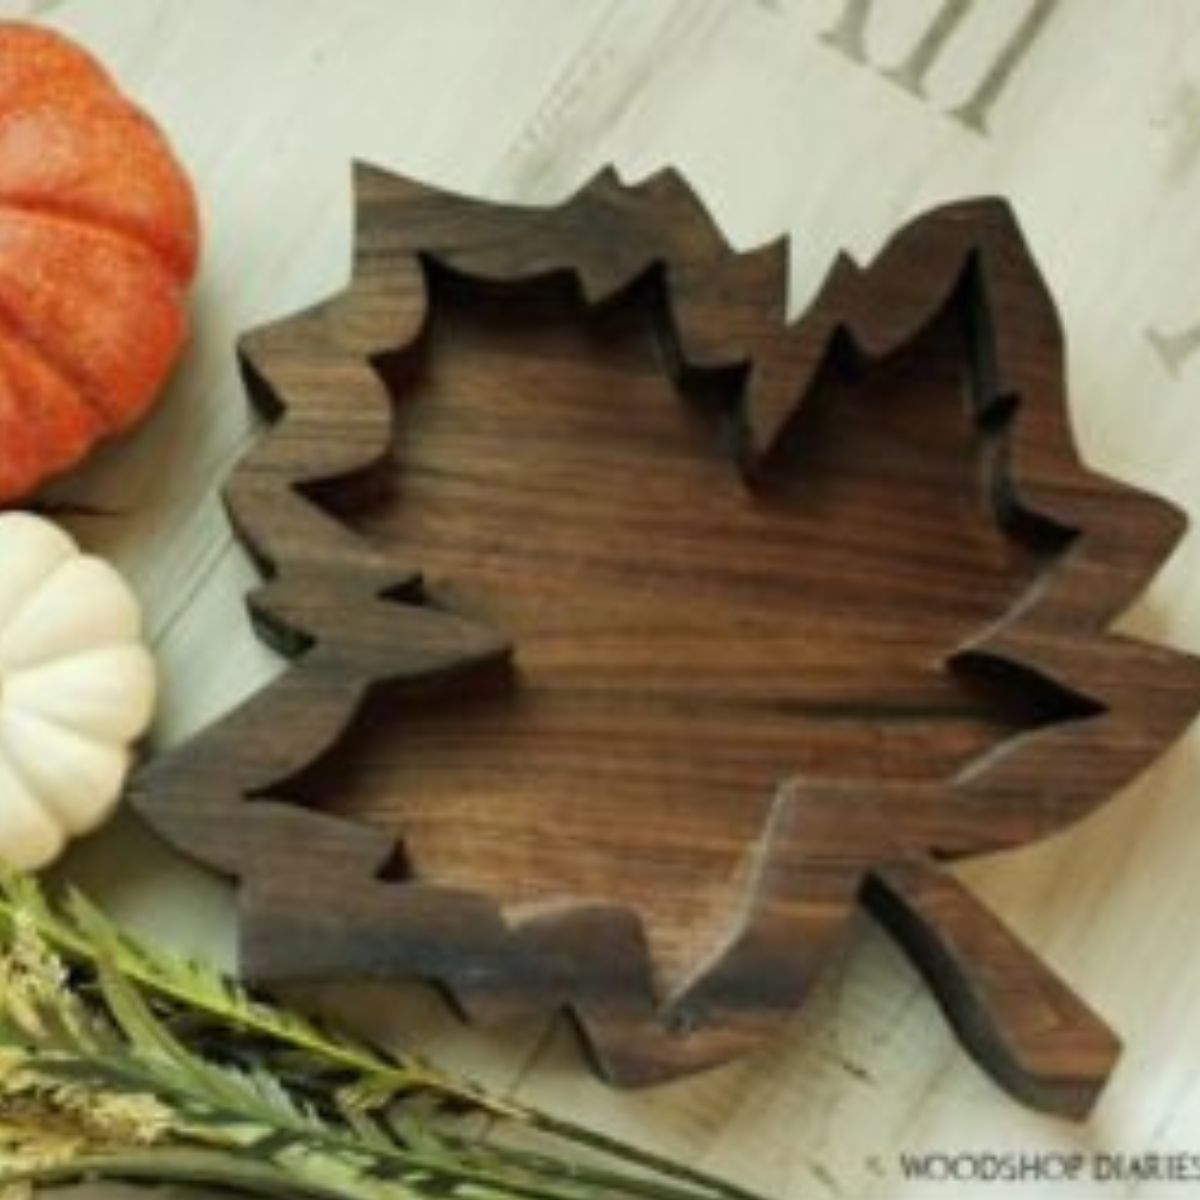 Completed fall tray sitting on coffee table with orange and white pumpkins and fall greenery.